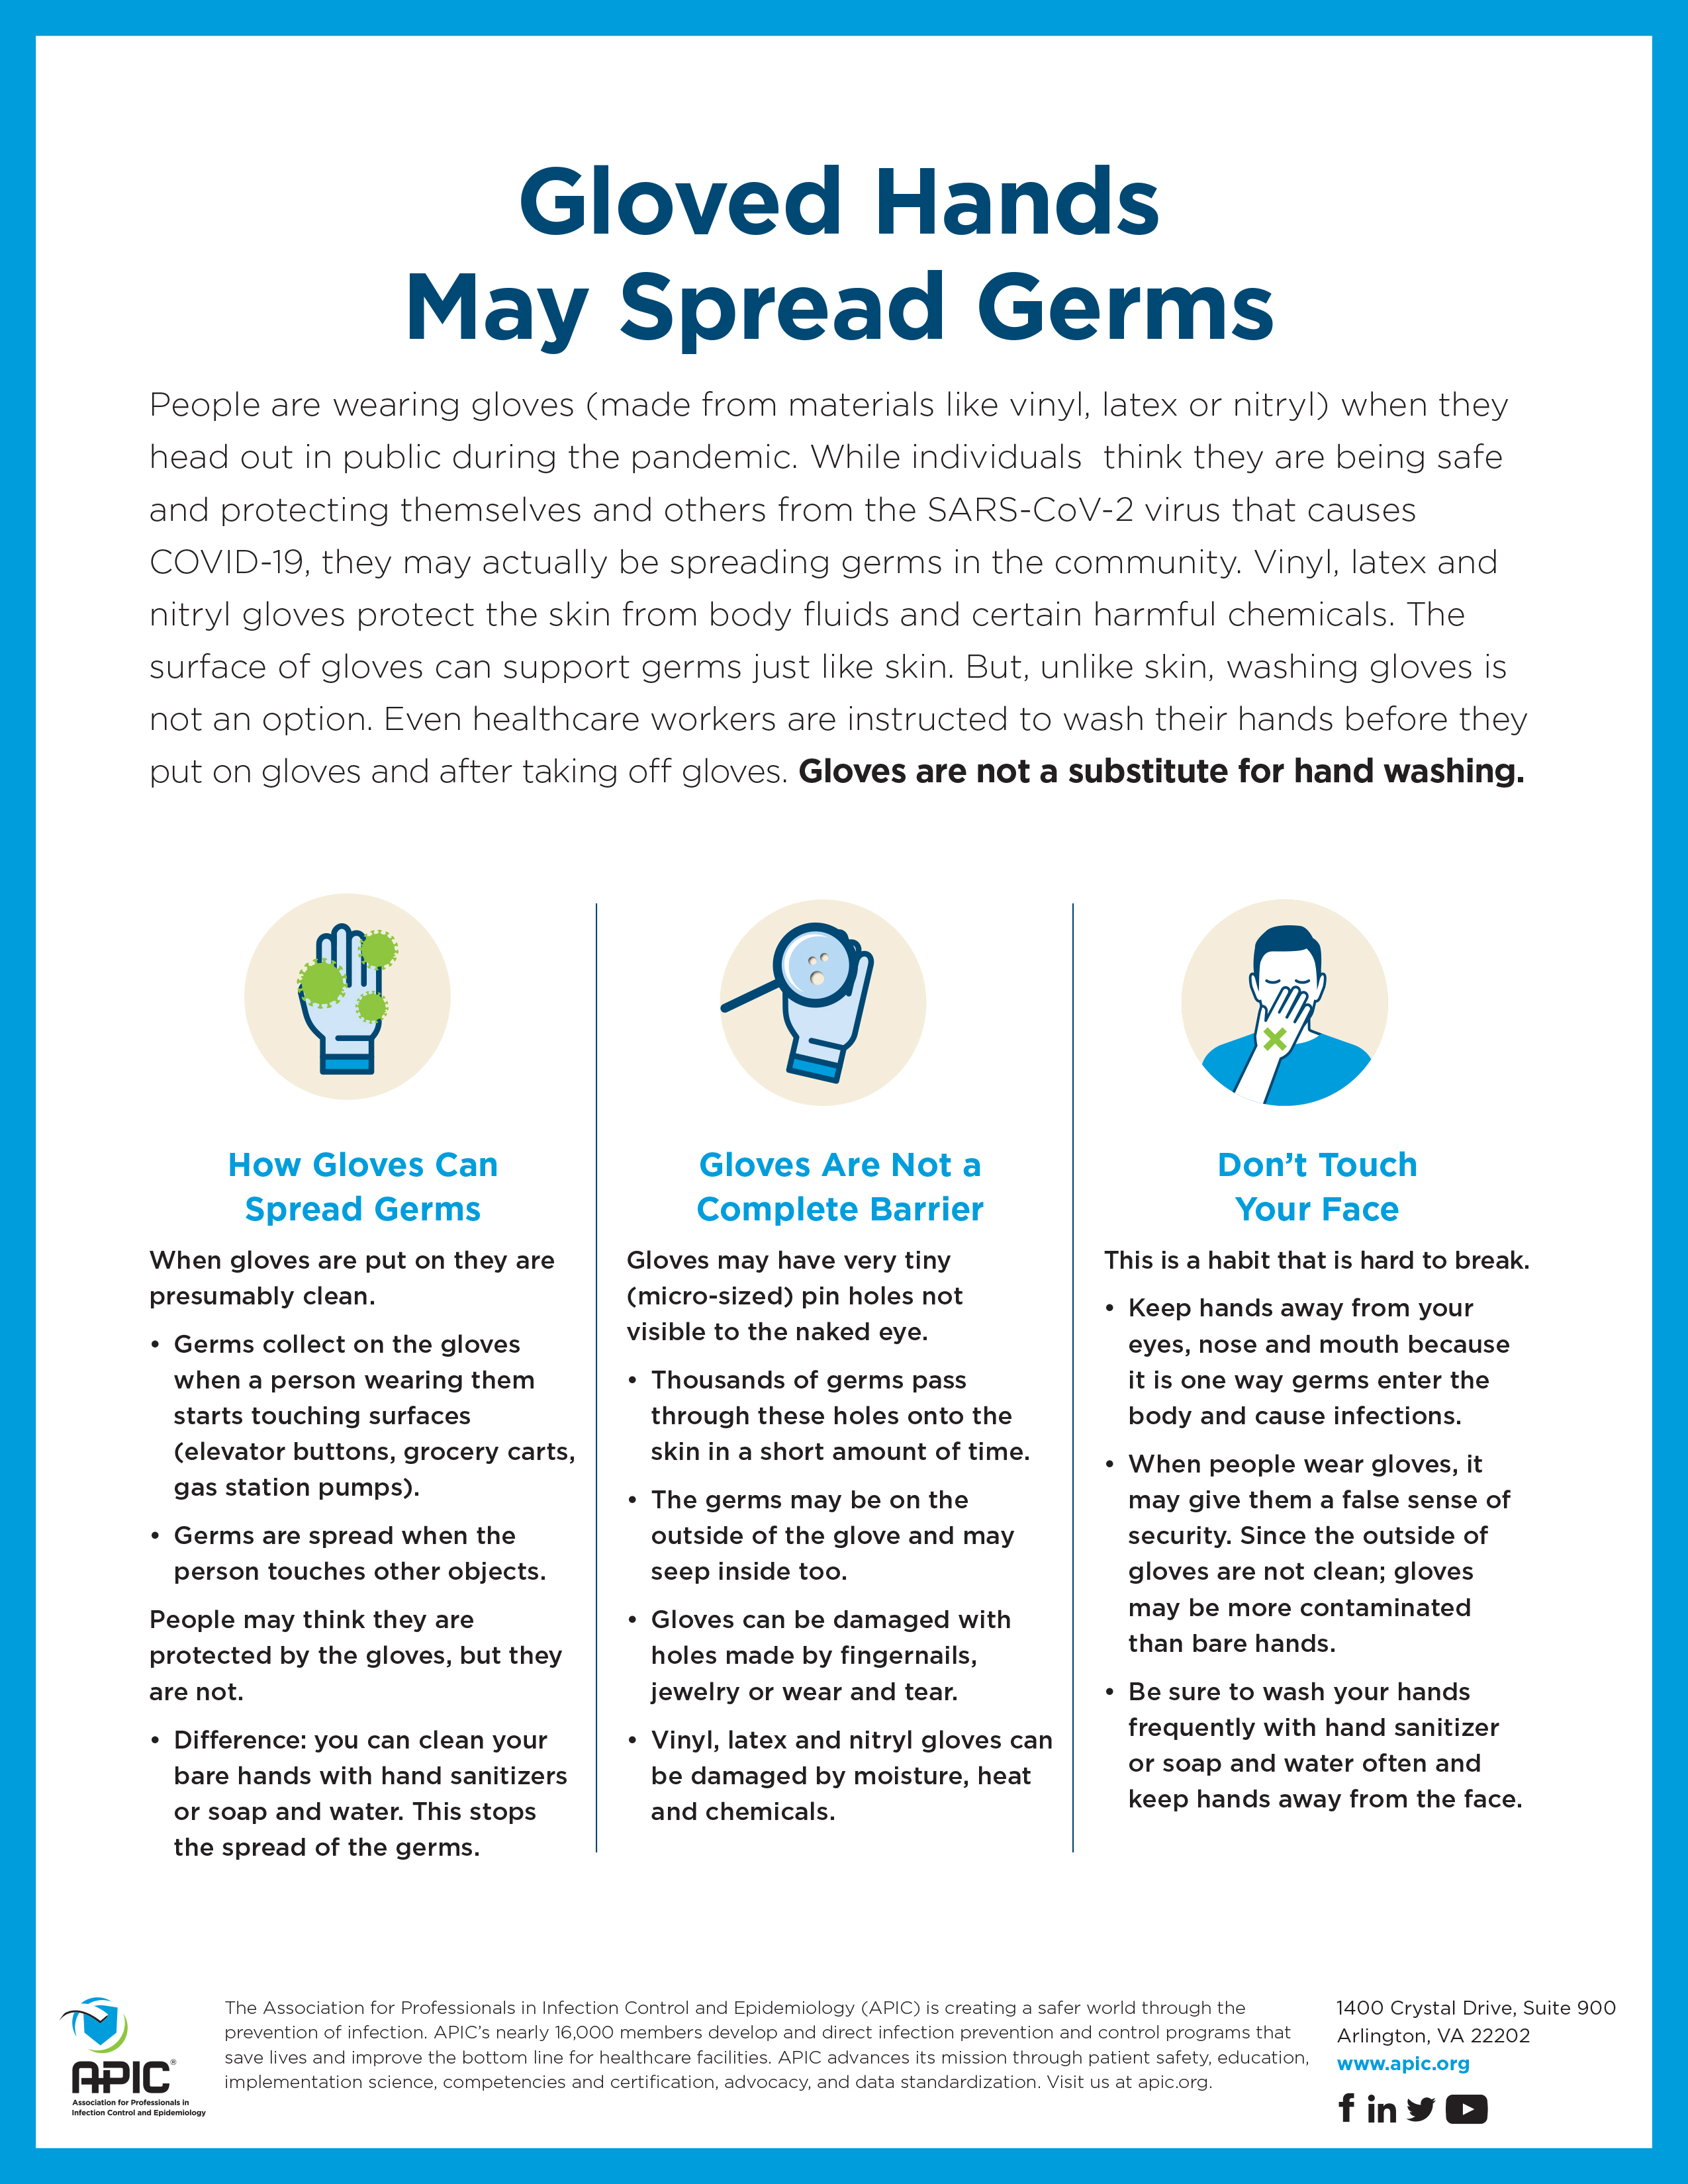 Gloved Hands Can Spread Germs